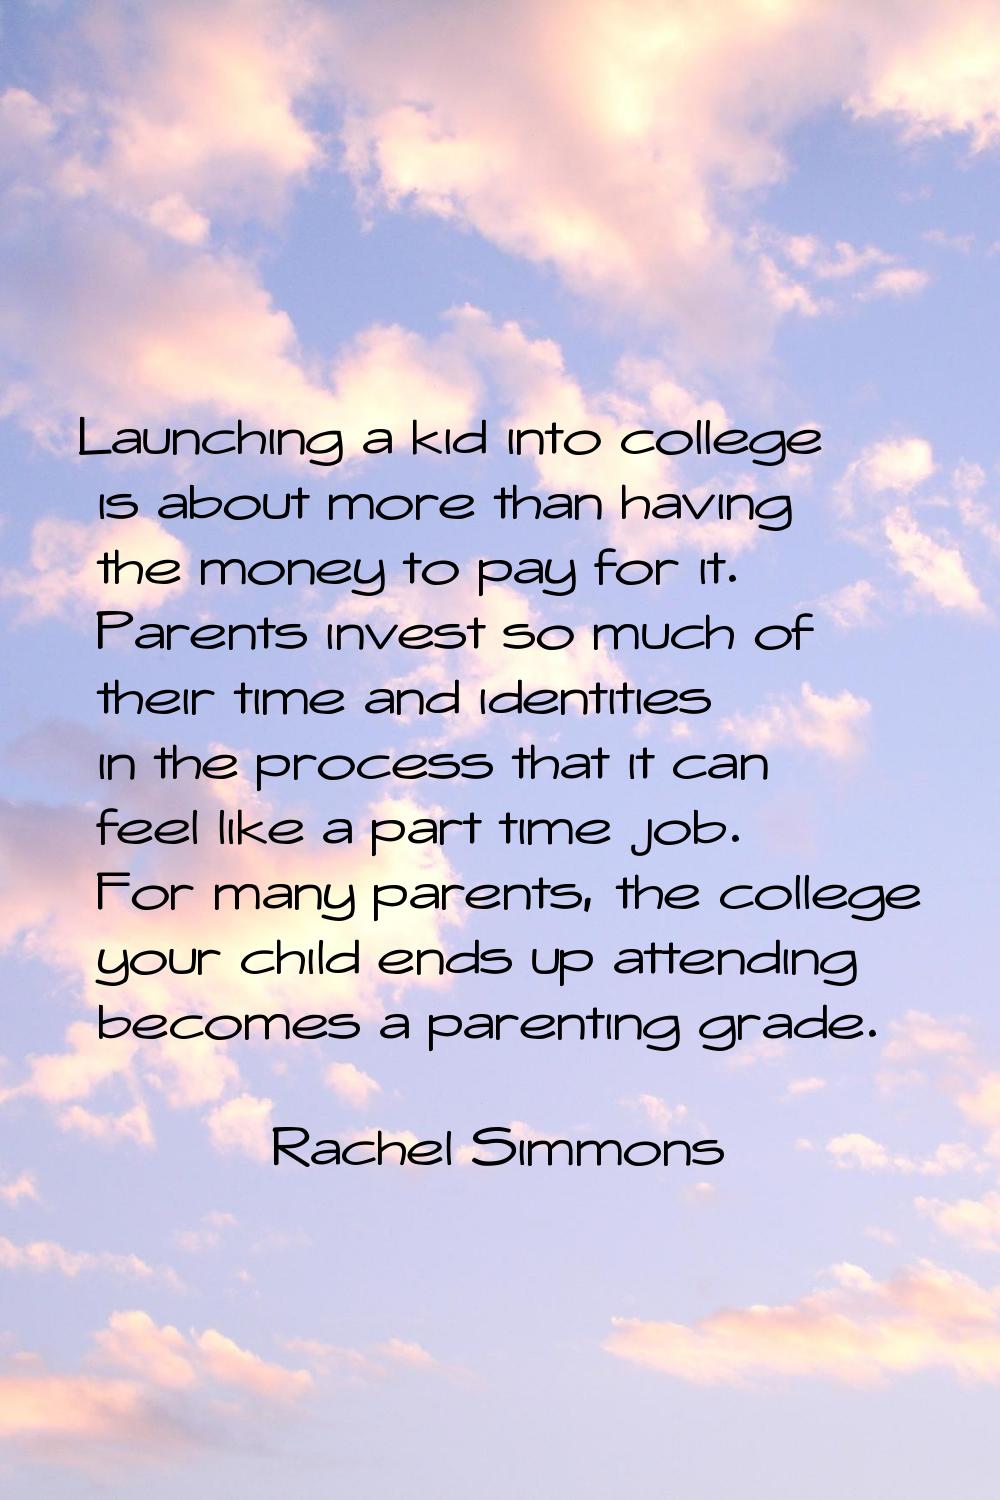 Launching a kid into college is about more than having the money to pay for it. Parents invest so m